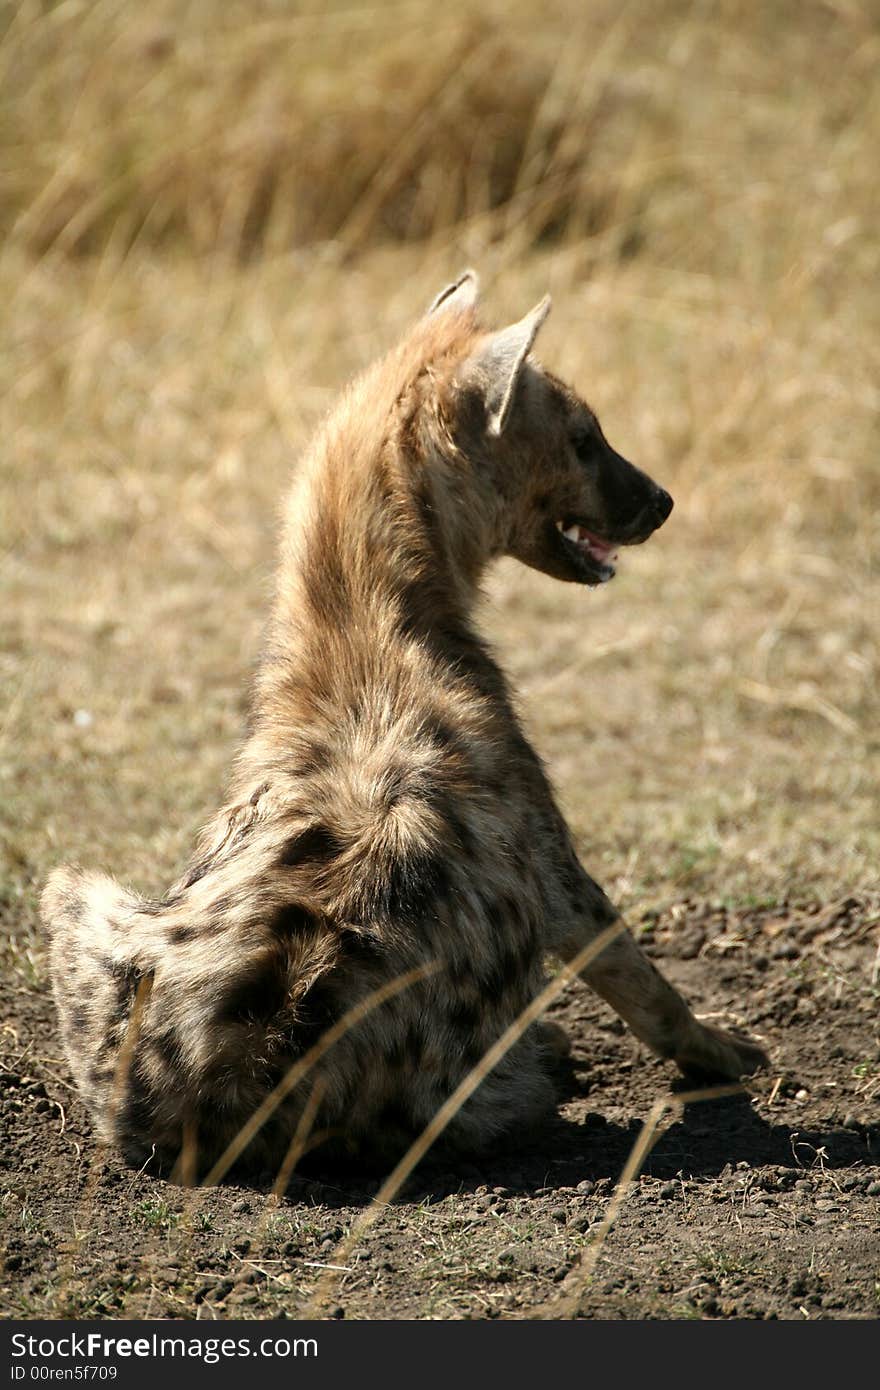 A young Spotted Hyena sitting in the Masai Mara Reserve (Kenya)